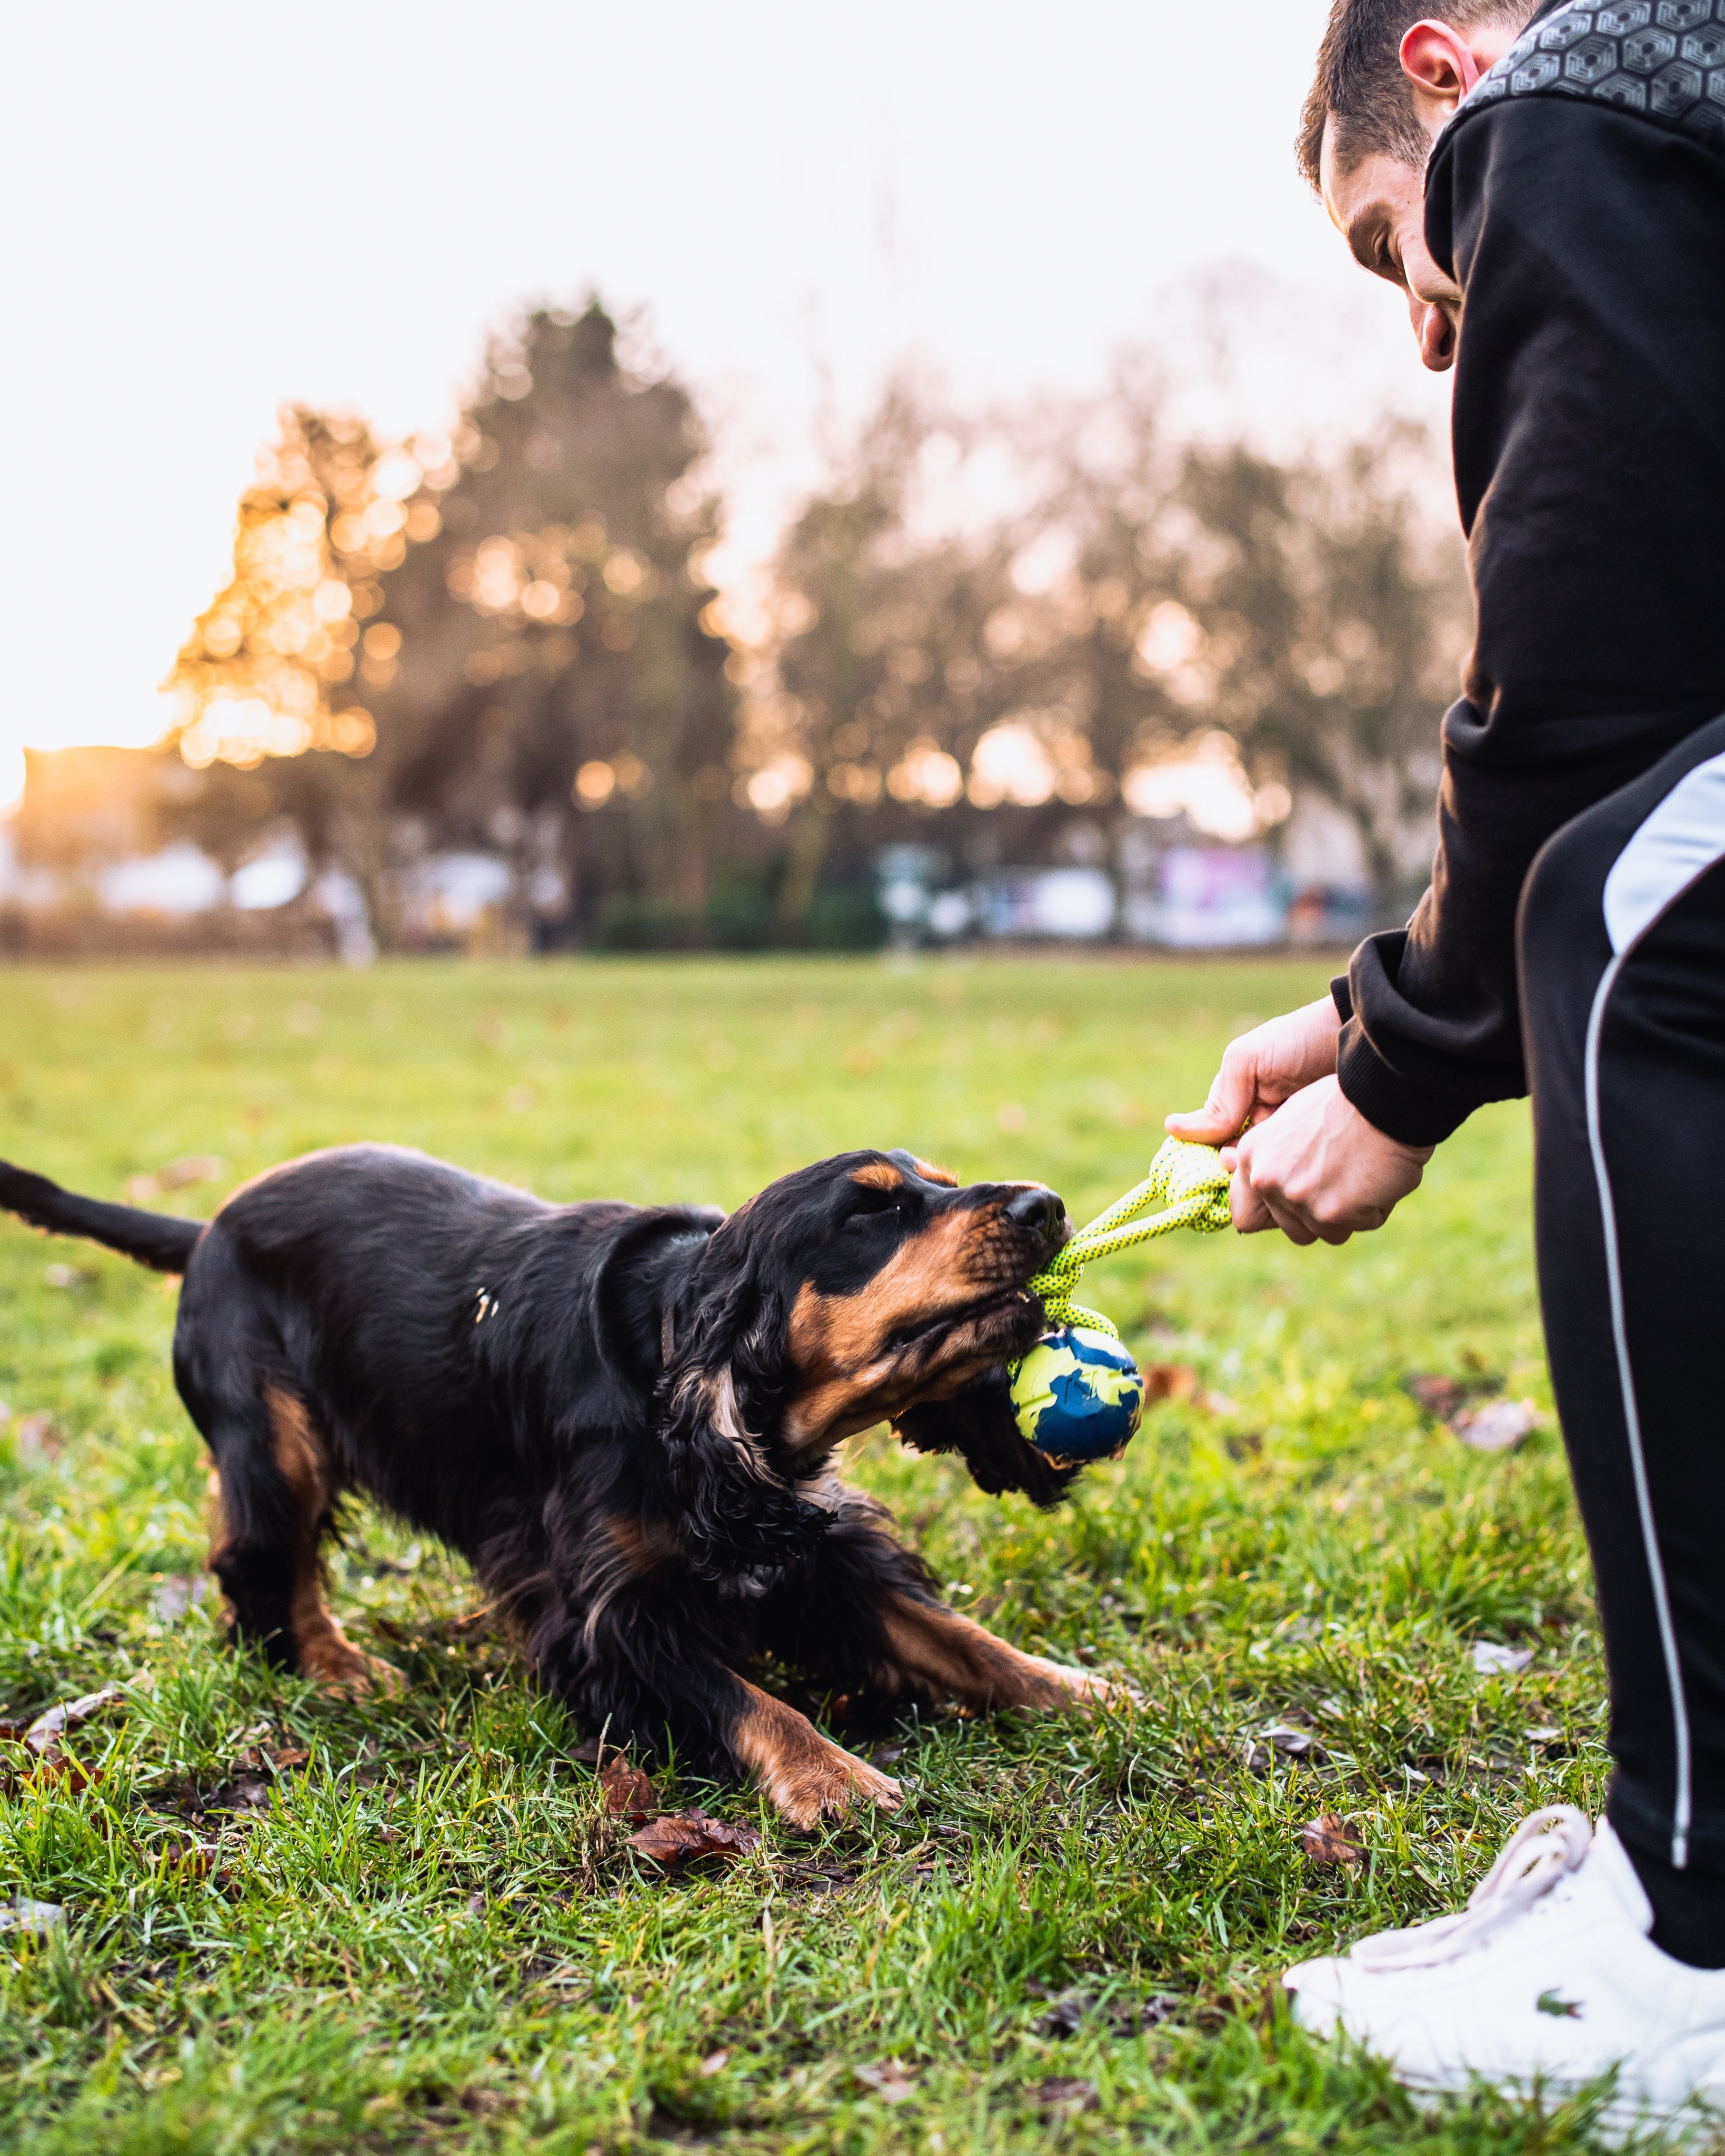 If you are a dog lover, playing with your dog is an important part of building a connection with your best friend! The ball is made from natural rubber, which is non-toxic and very durable. Our Loopo dog toy is great for underhand throwing (so you do not strain your shoulder) and fetching with your dog.